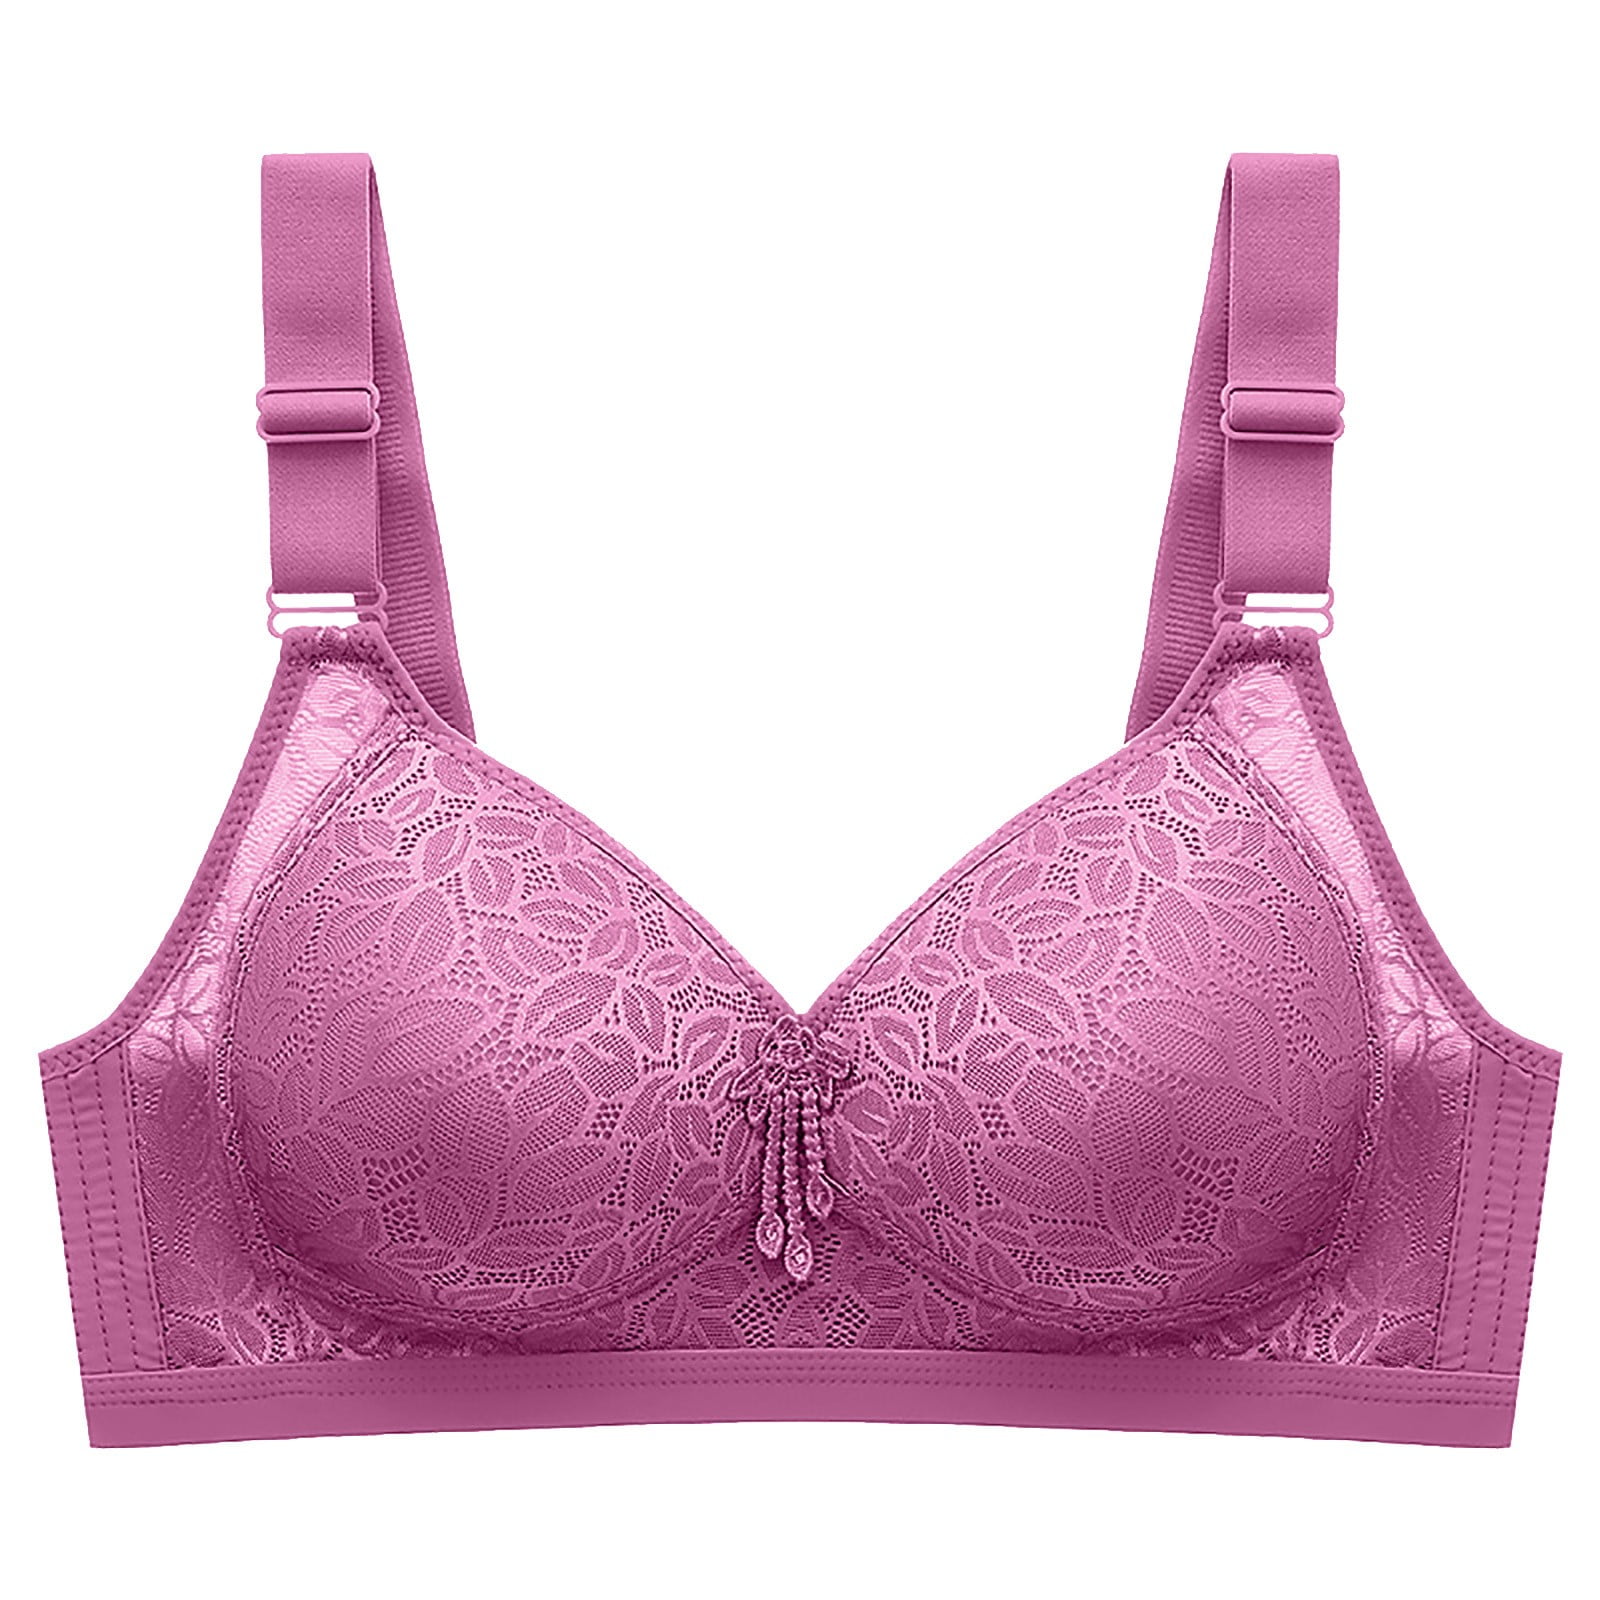 MyRunway  Shop Distraction Medium Pink Lace Padded Underwire Balconette Bra  for Women from